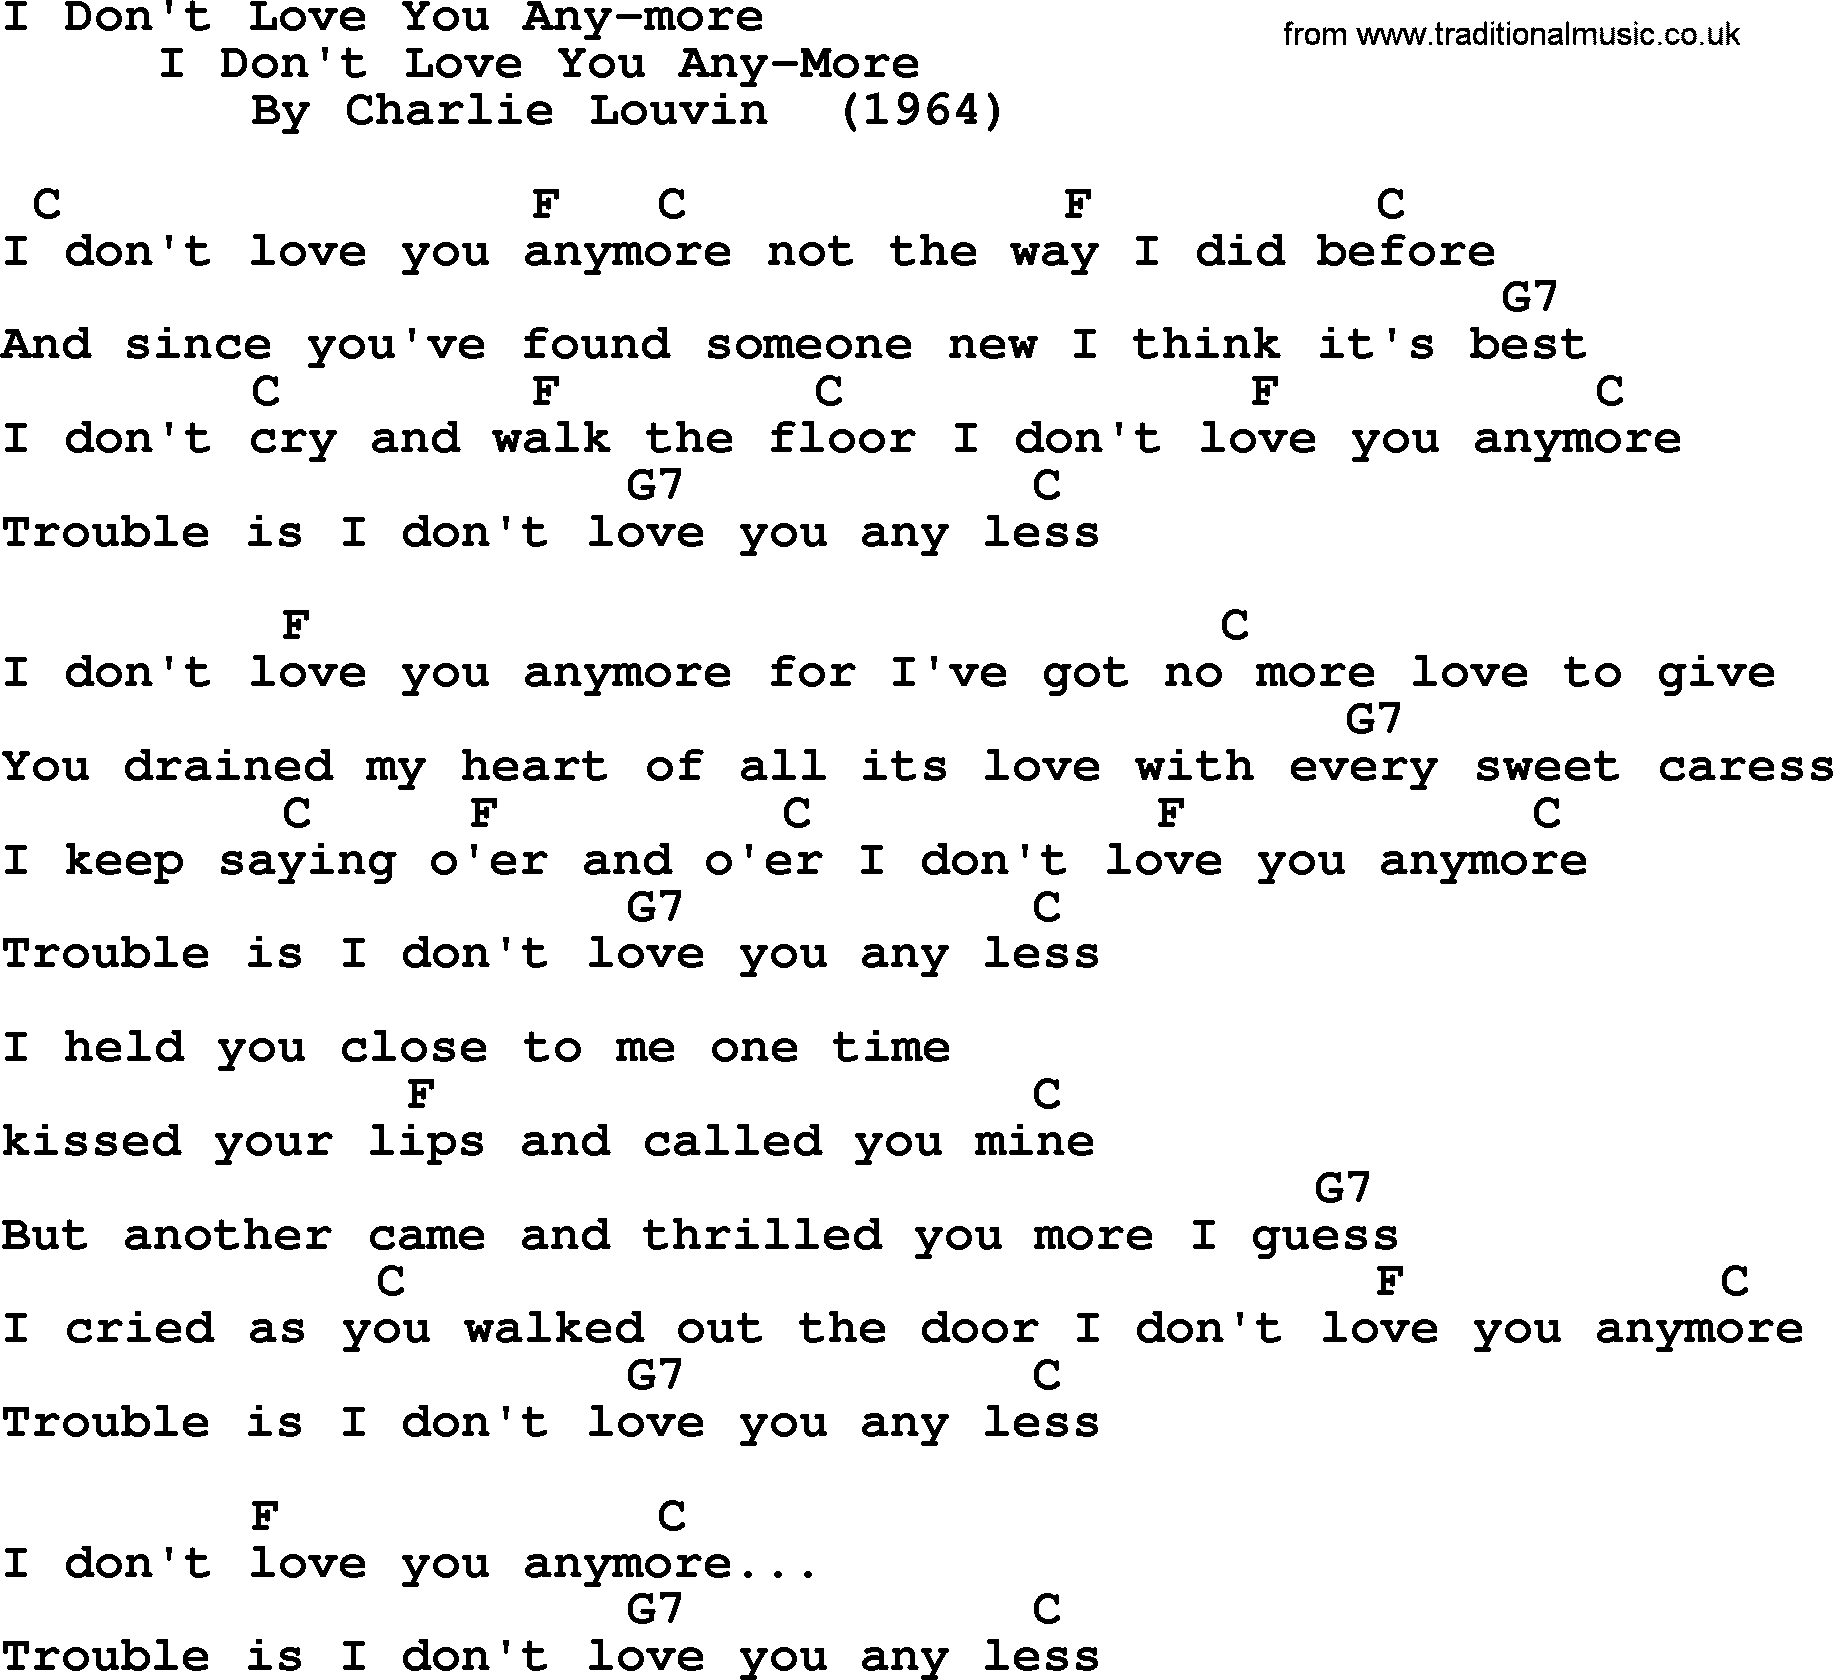 Bluegrass song: I Don't Love You Any-More, lyrics and chords